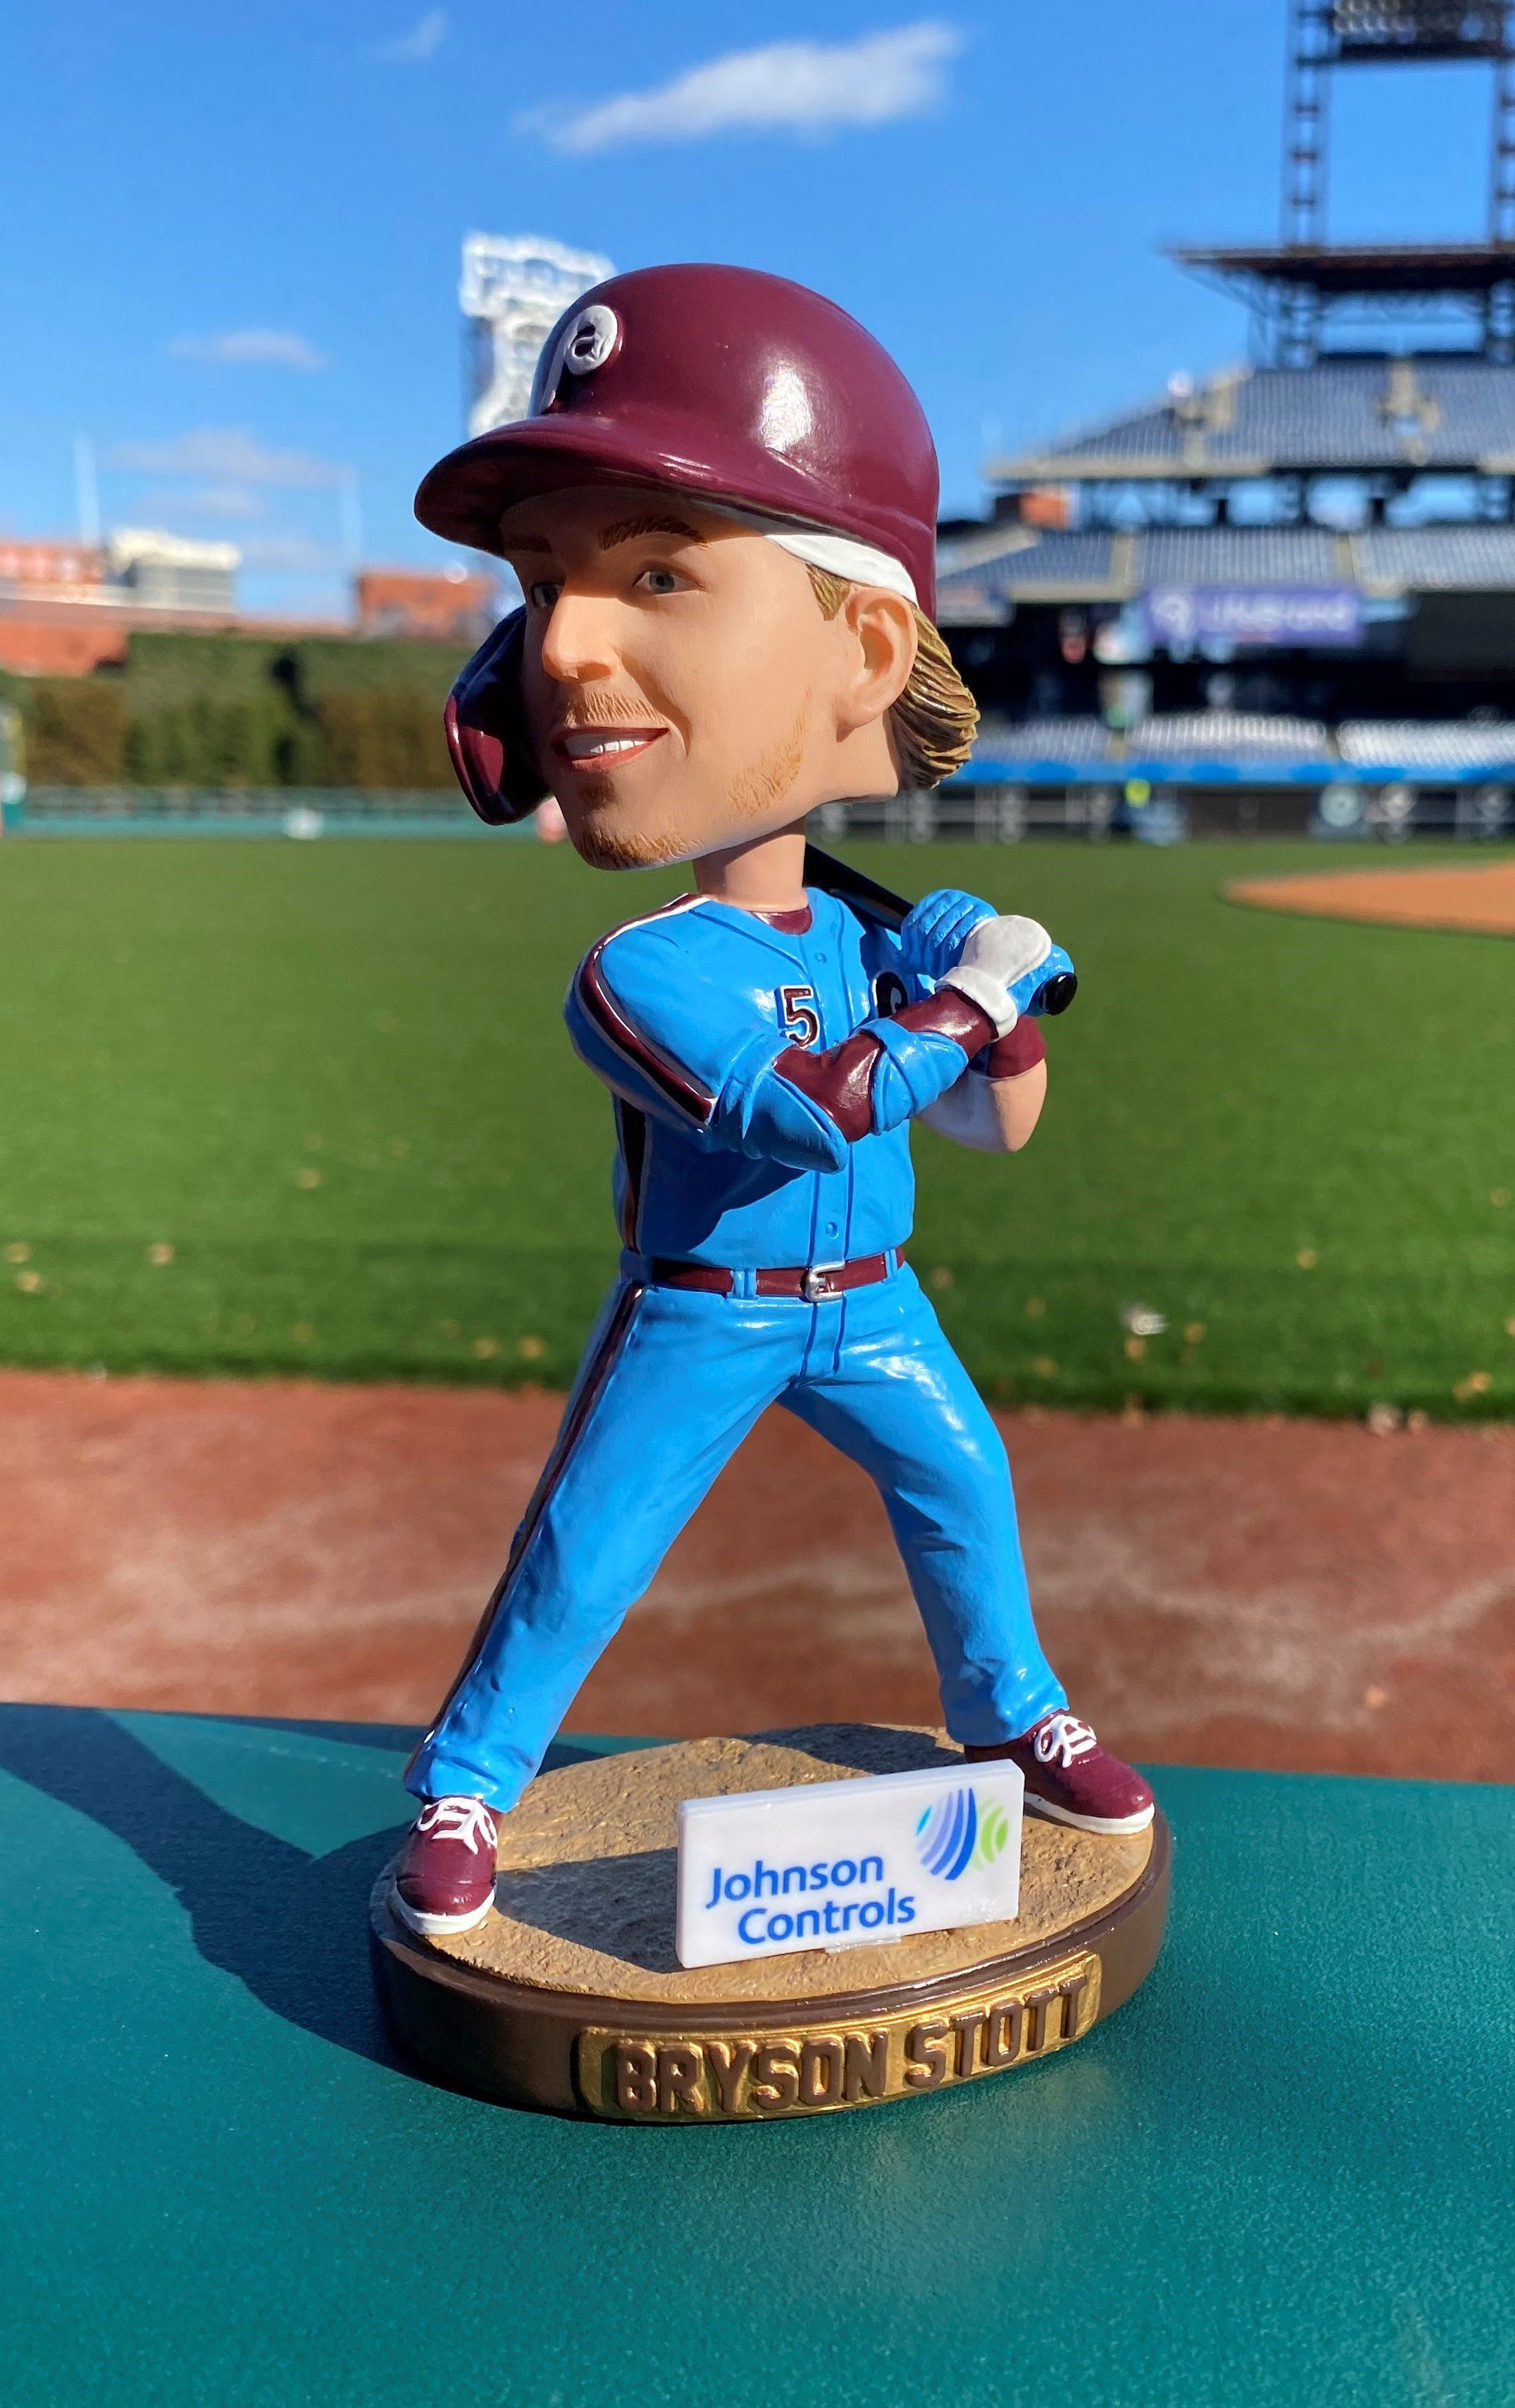 The Phillies' best giveaways and promotions this season, including